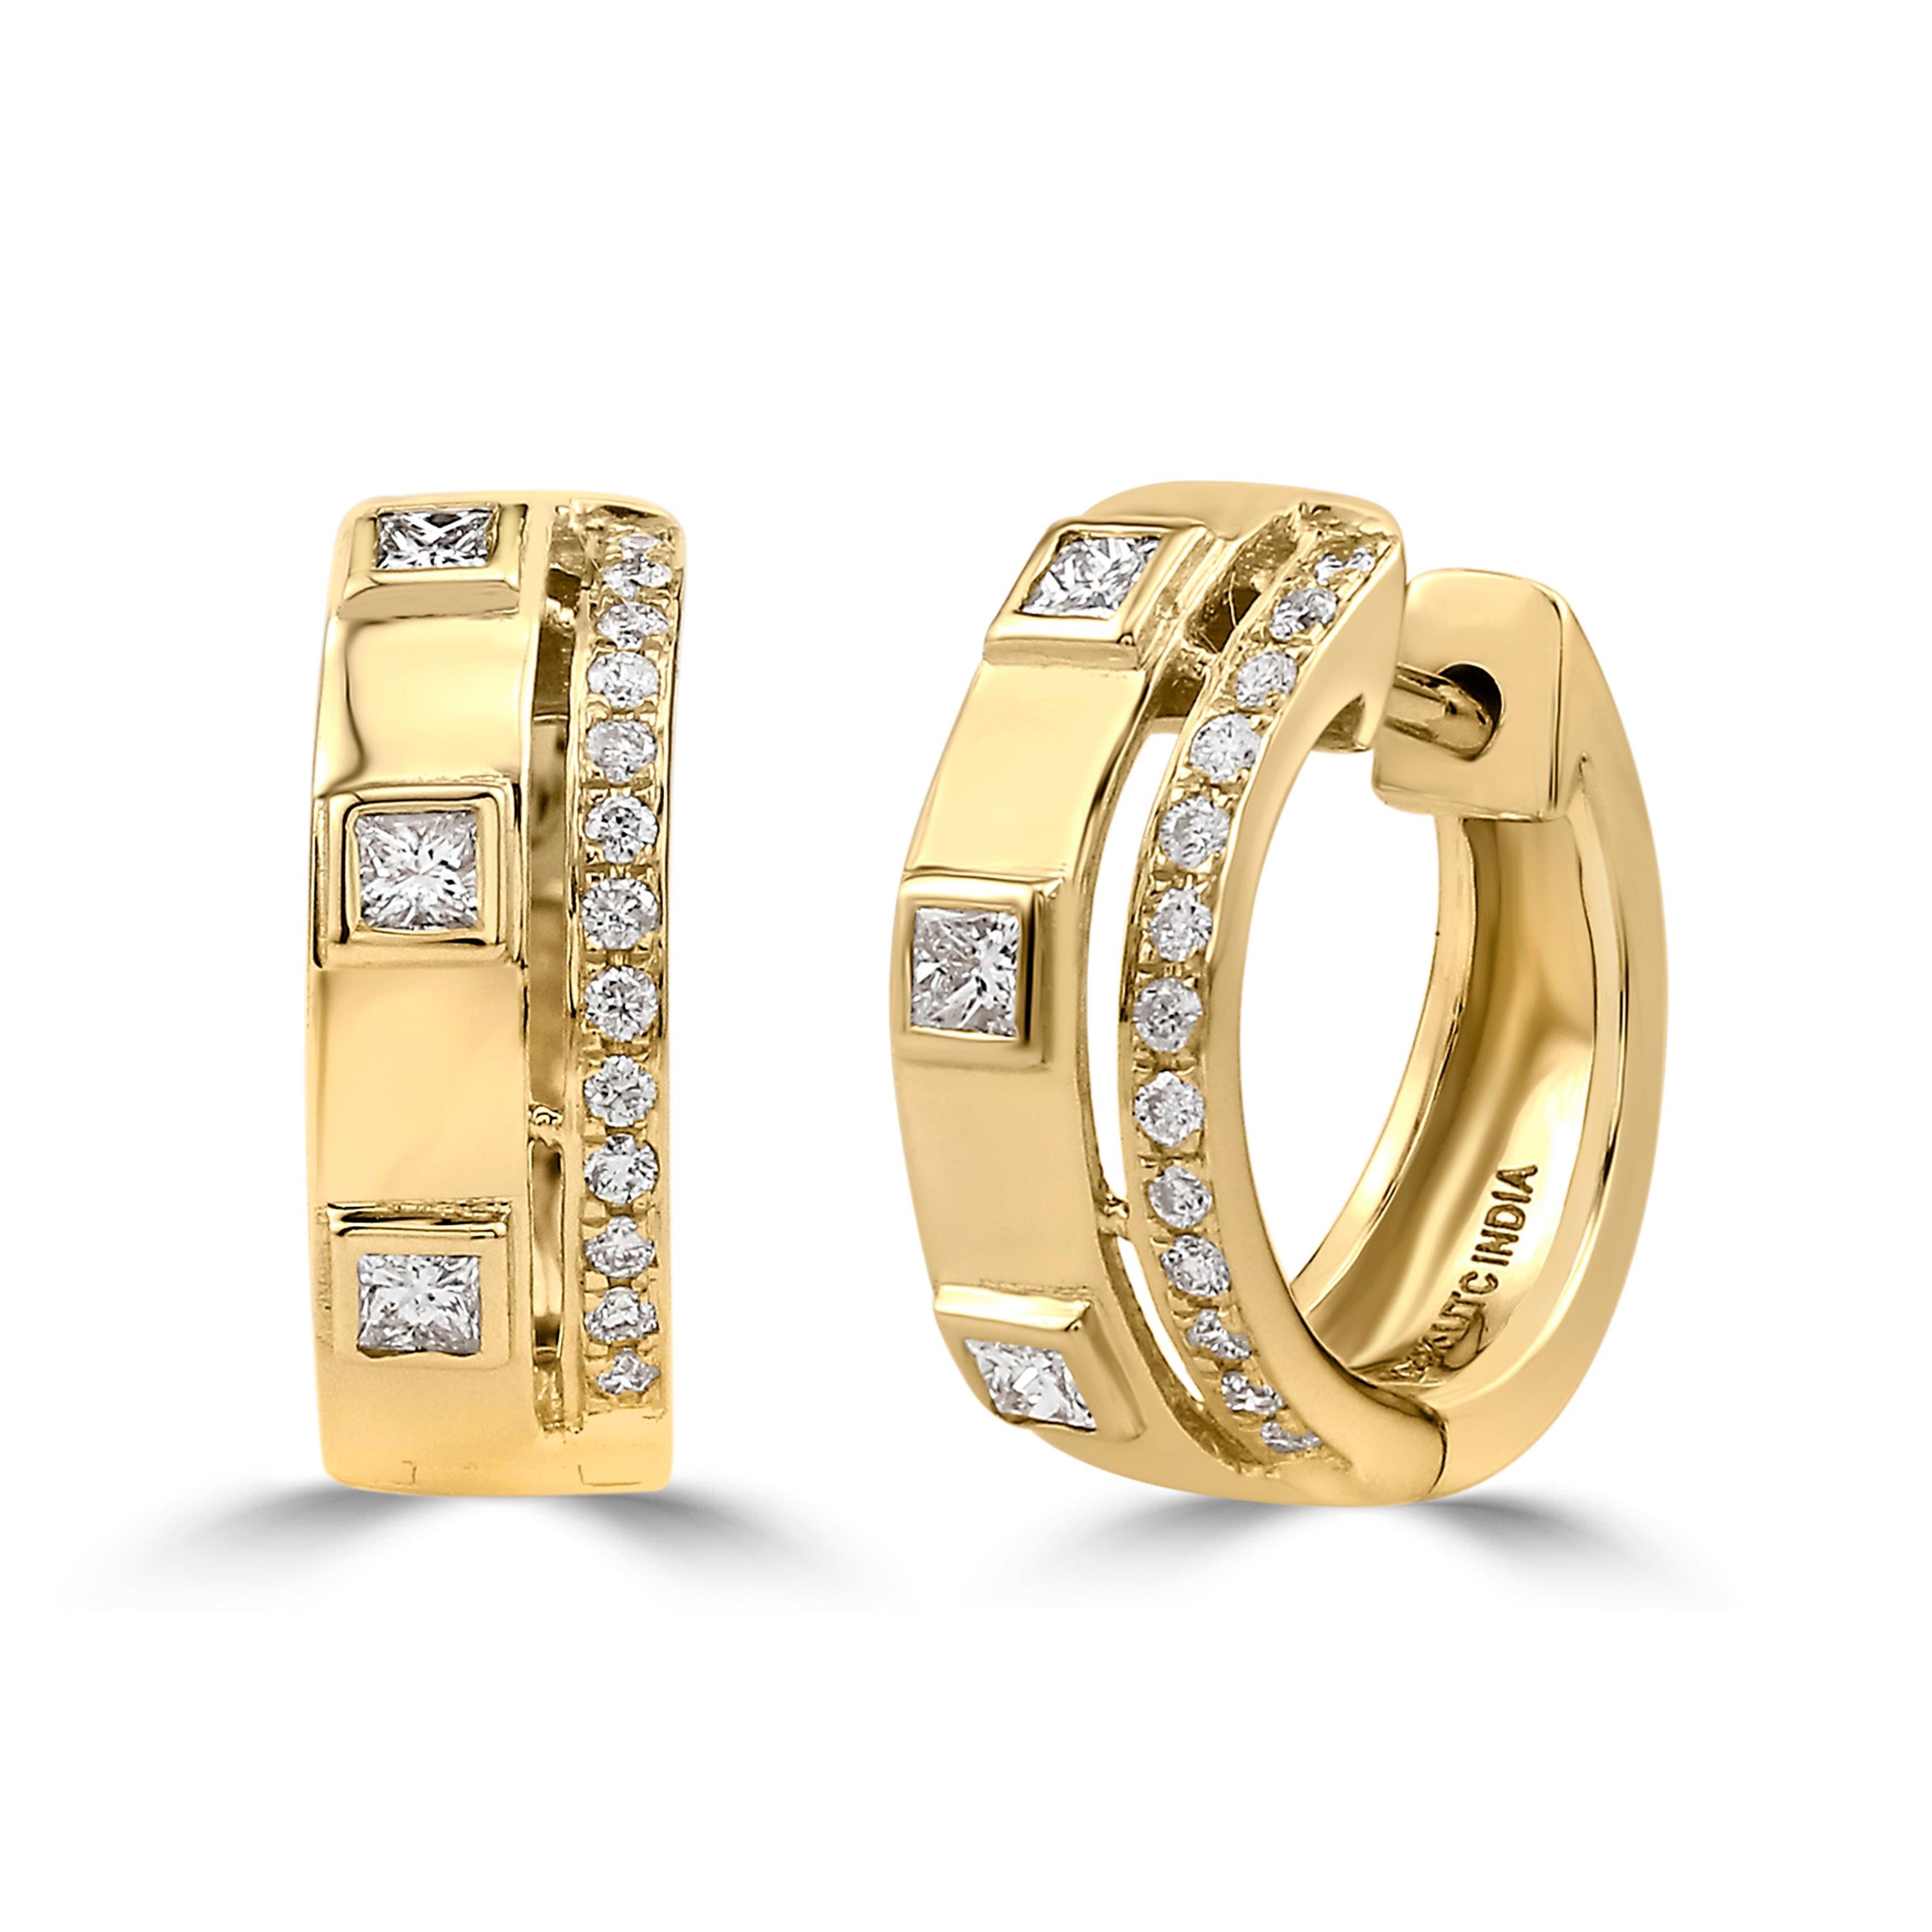 The 0.31 carat round single-cut and square princess-cut diamonds set with precision in 14K Yellow Gold by Luxle give these lobe-hugging hoop earrings a sparkling appearance. An easy and secure lock is provided by the click- it backing on this pair